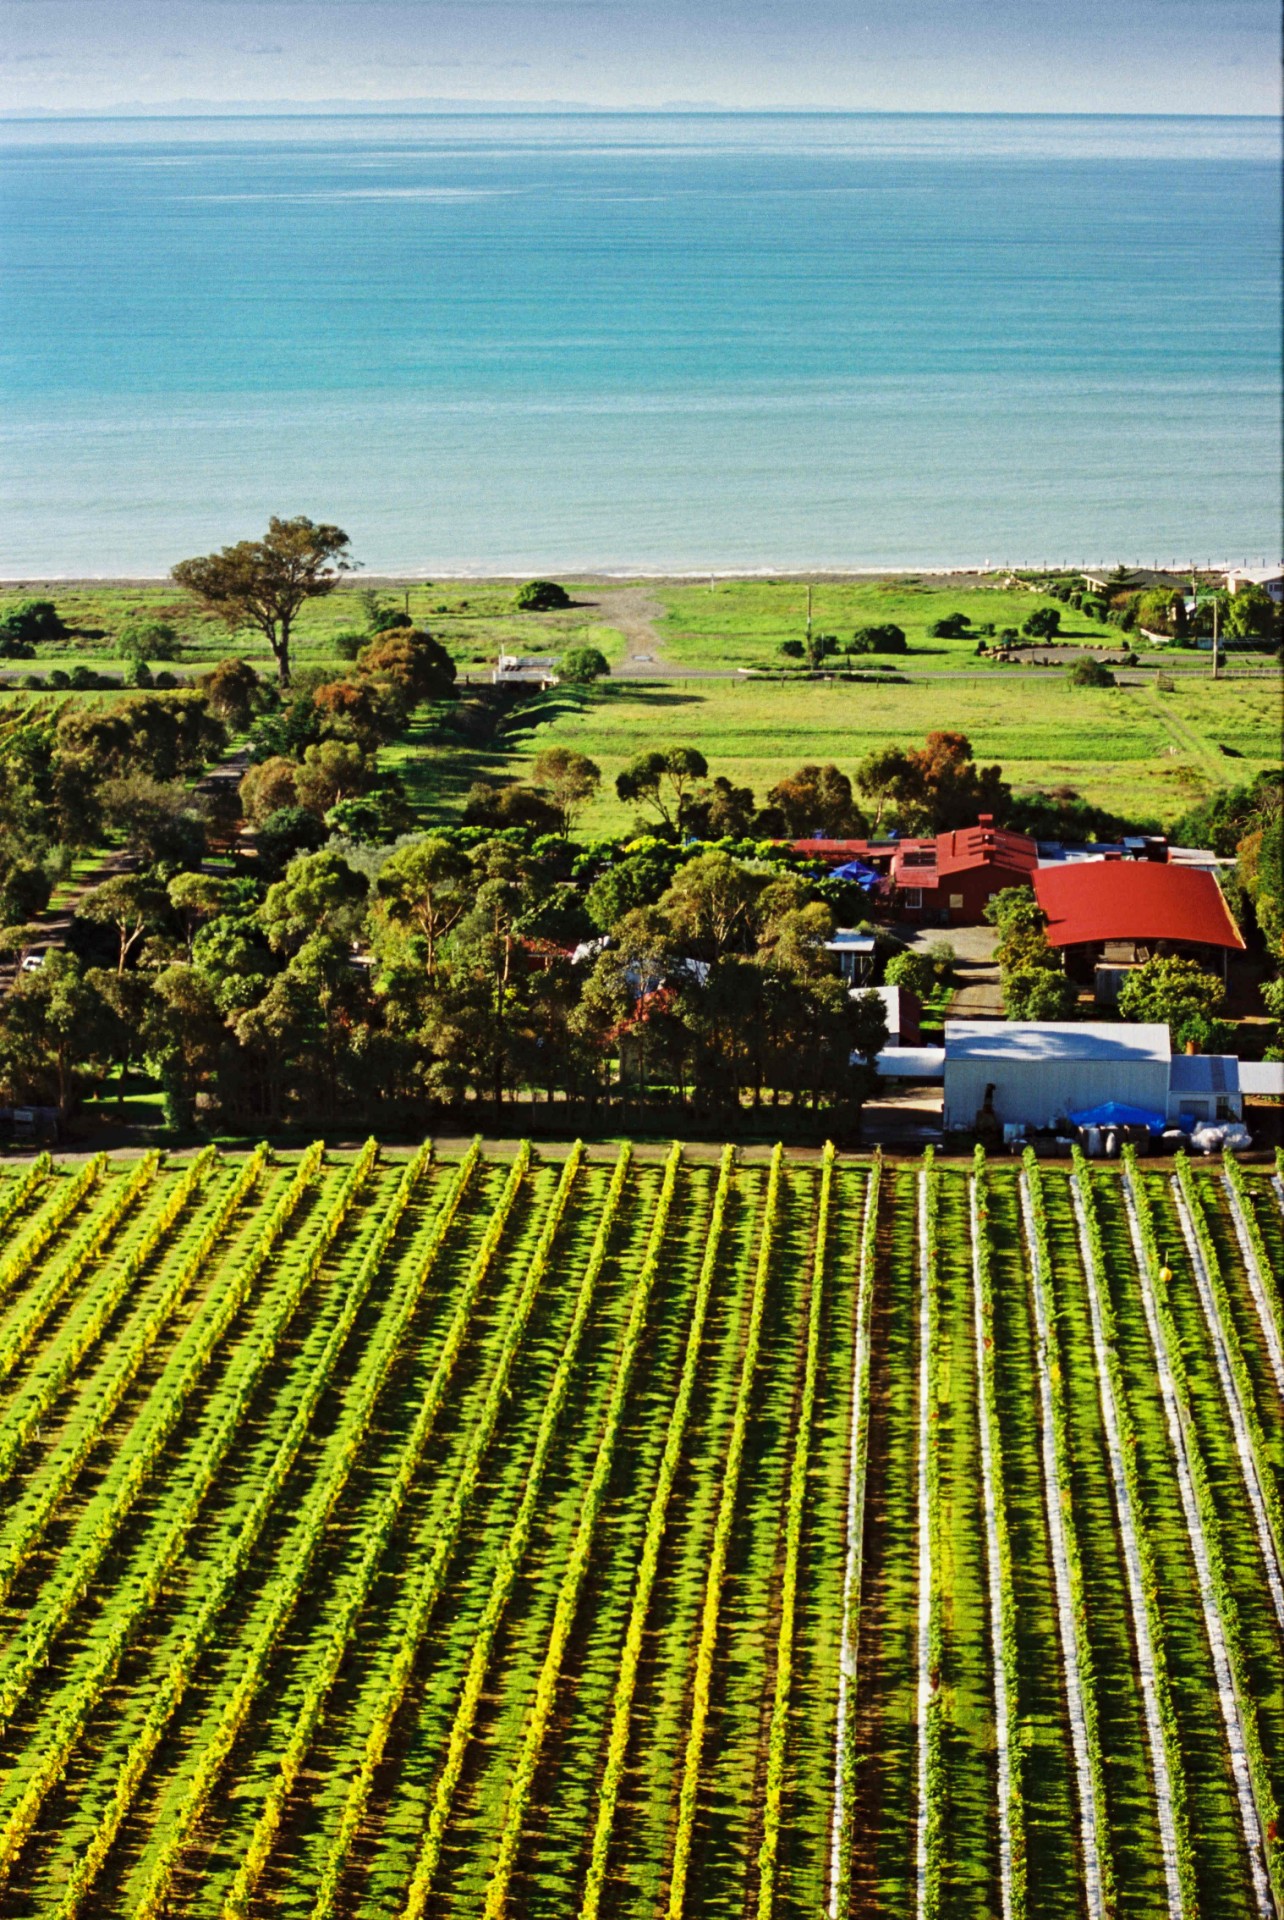 Clearview Estate winery, vines near the ocean